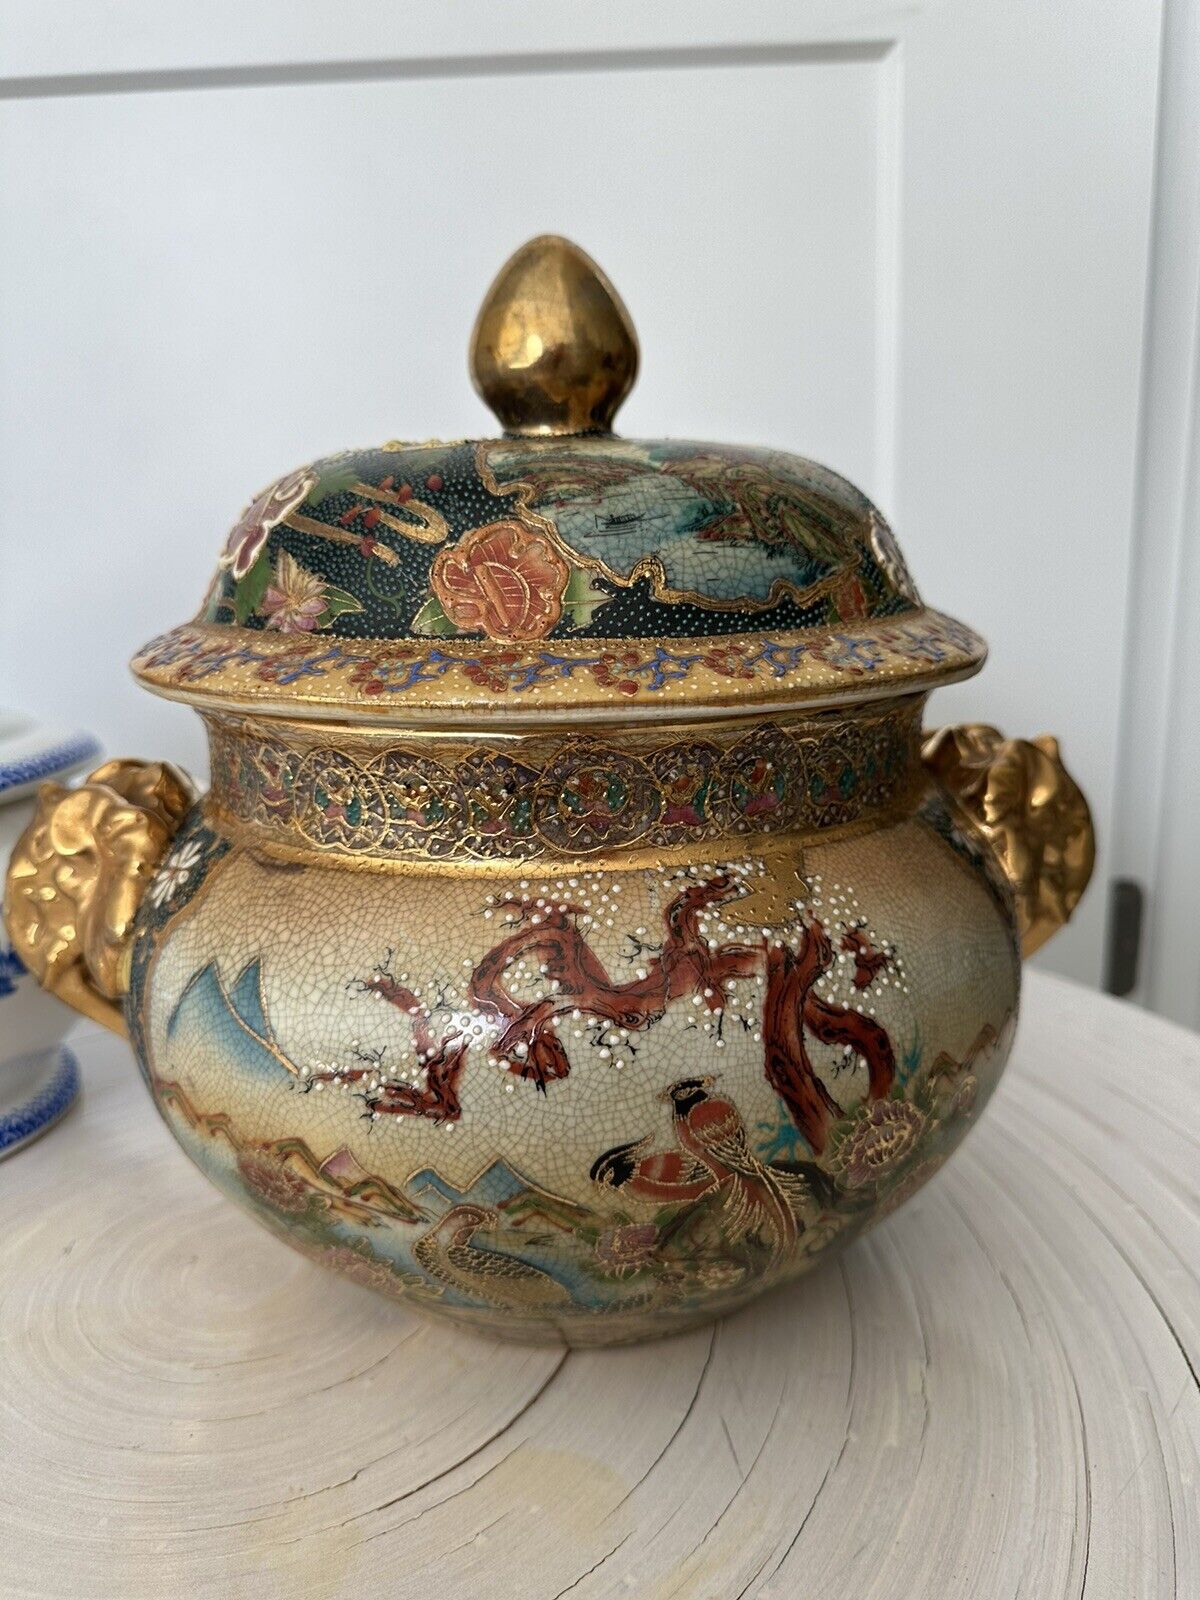 Beautiful vintage Satsuma style vase/tureen  with lid, painted with gold trim